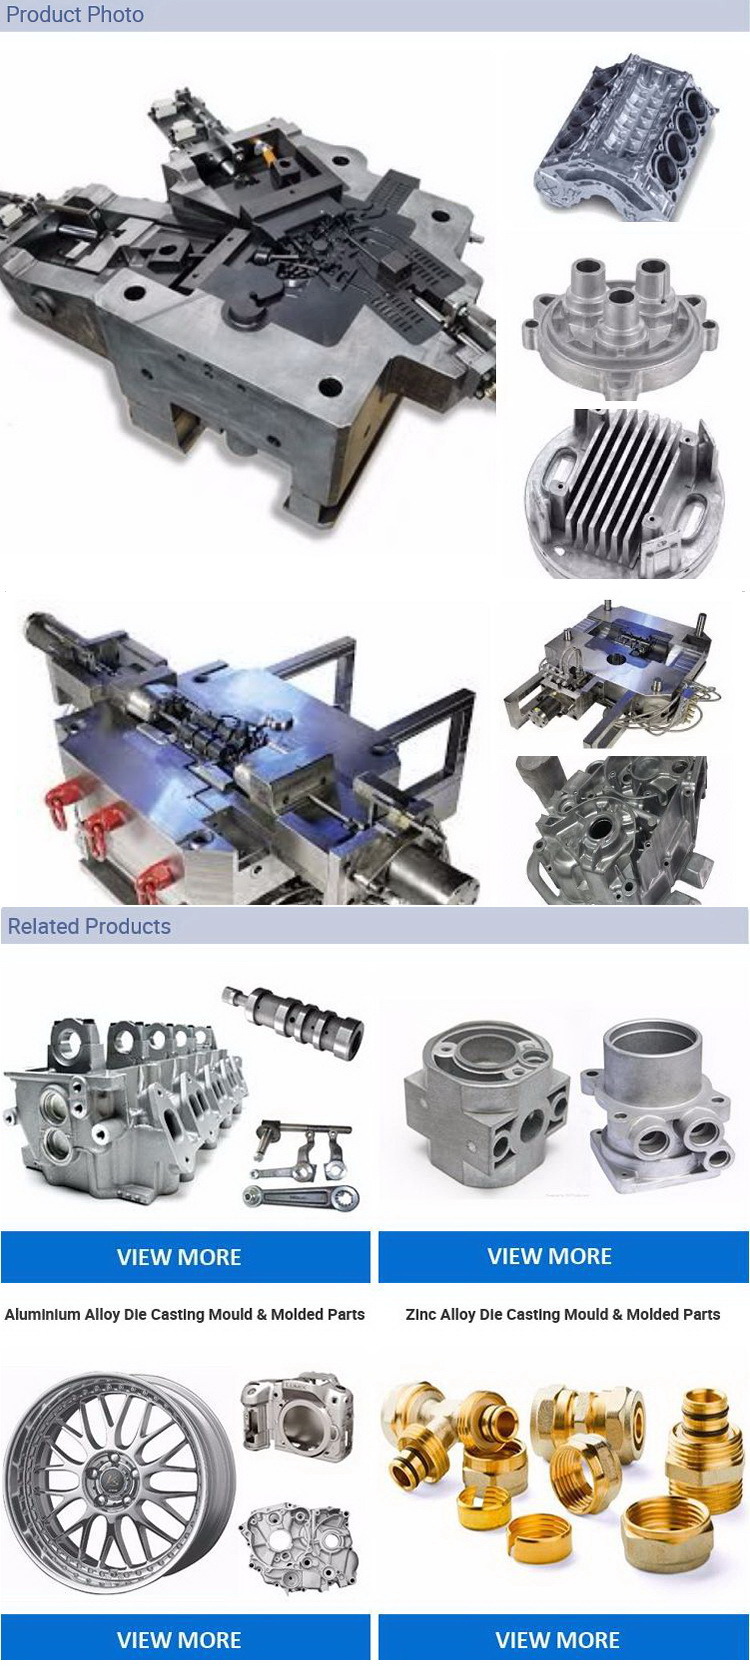 Transmission System Steel Casting Small Parts Investment Casting